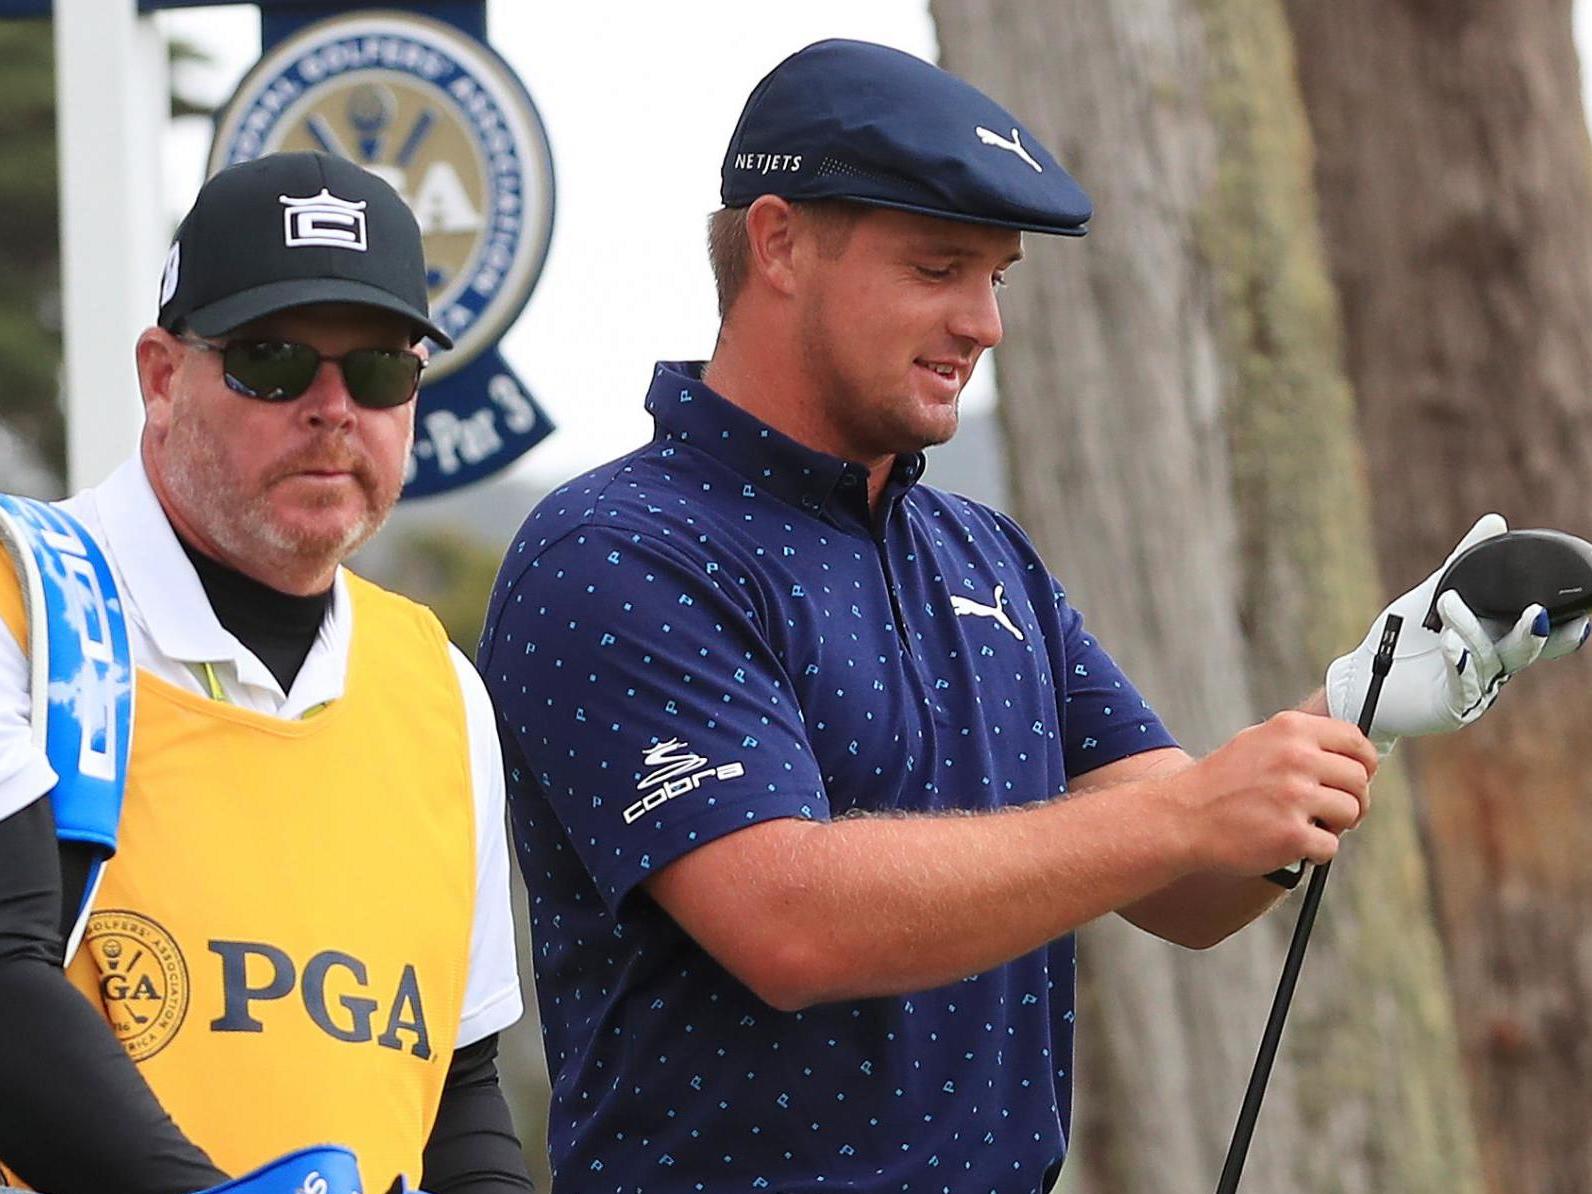 Bryson DeChambeau accidentally snapped his driver in the opening round of the PGA Championship